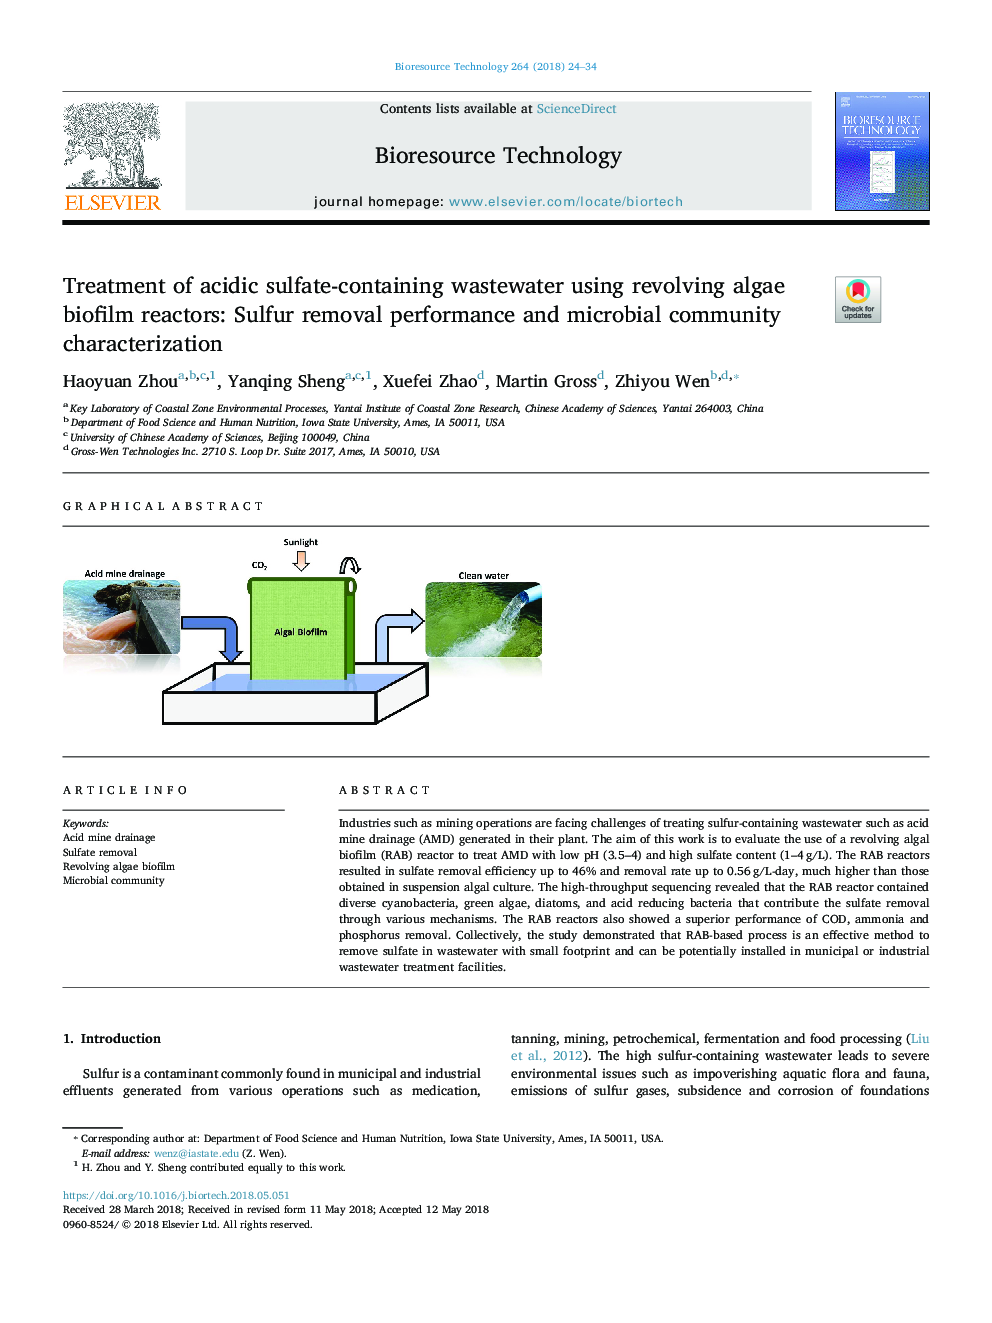 Treatment of acidic sulfate-containing wastewater using revolving algae biofilm reactors: Sulfur removal performance and microbial community characterization